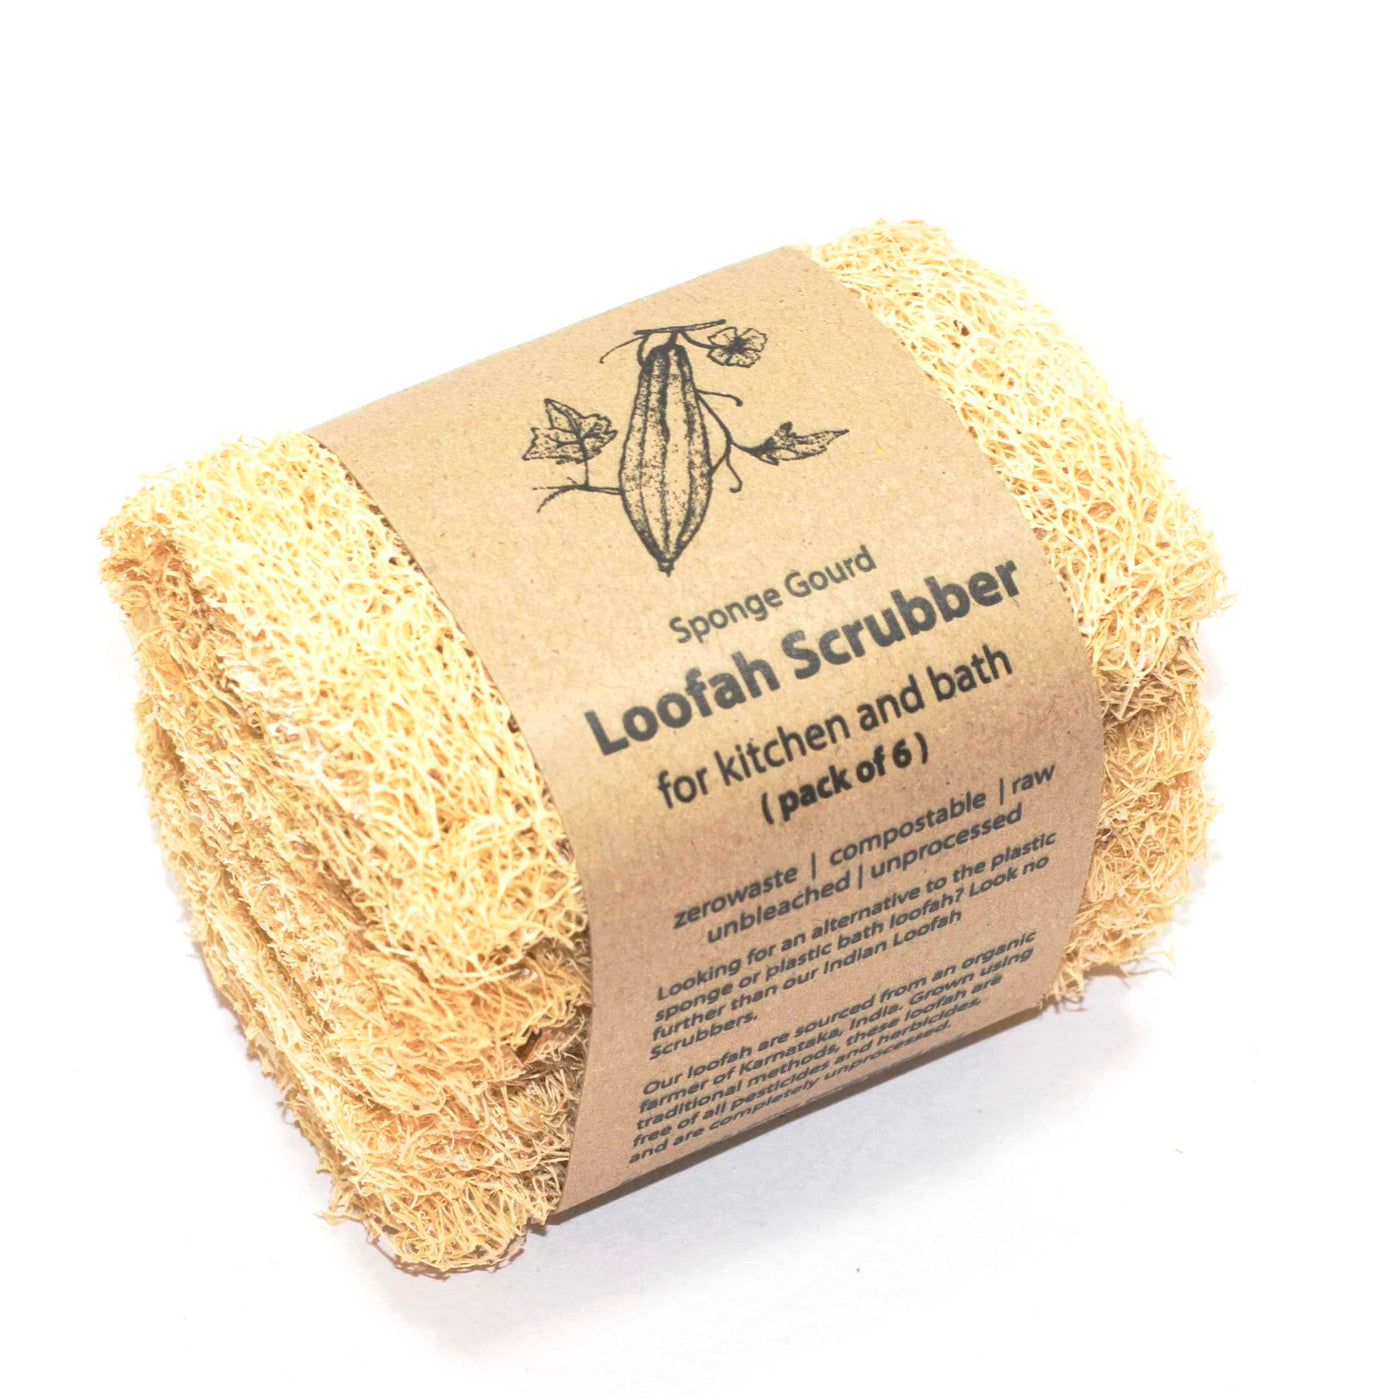 Natural body & kitchen loofah scrubber - pack of 2